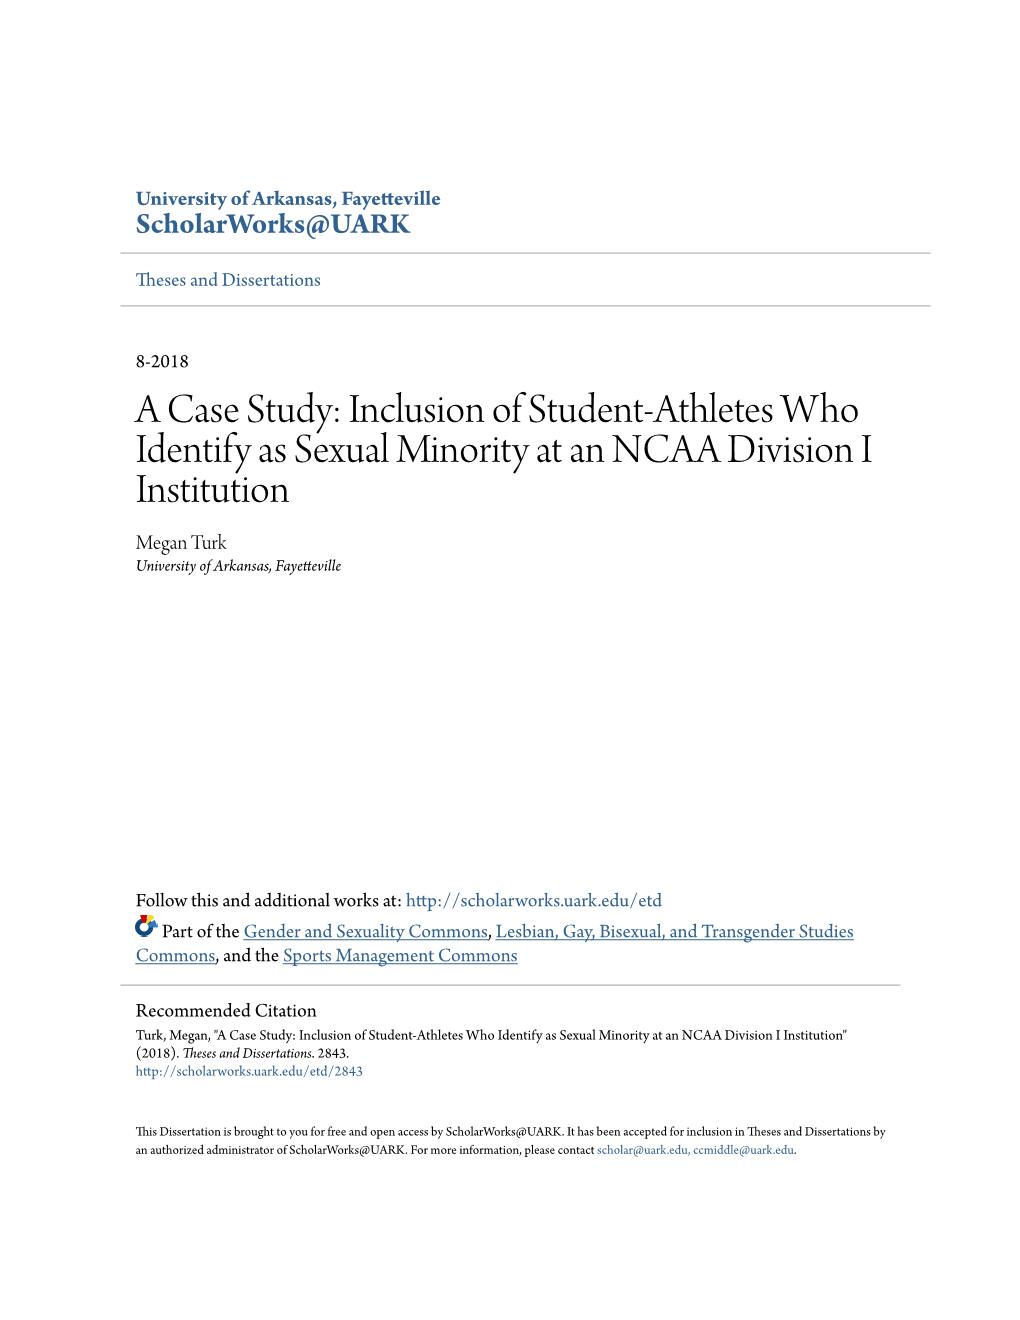 Inclusion of Student-Athletes Who Identify As Sexual Minority at an NCAA Division I Institution Megan Turk University of Arkansas, Fayetteville